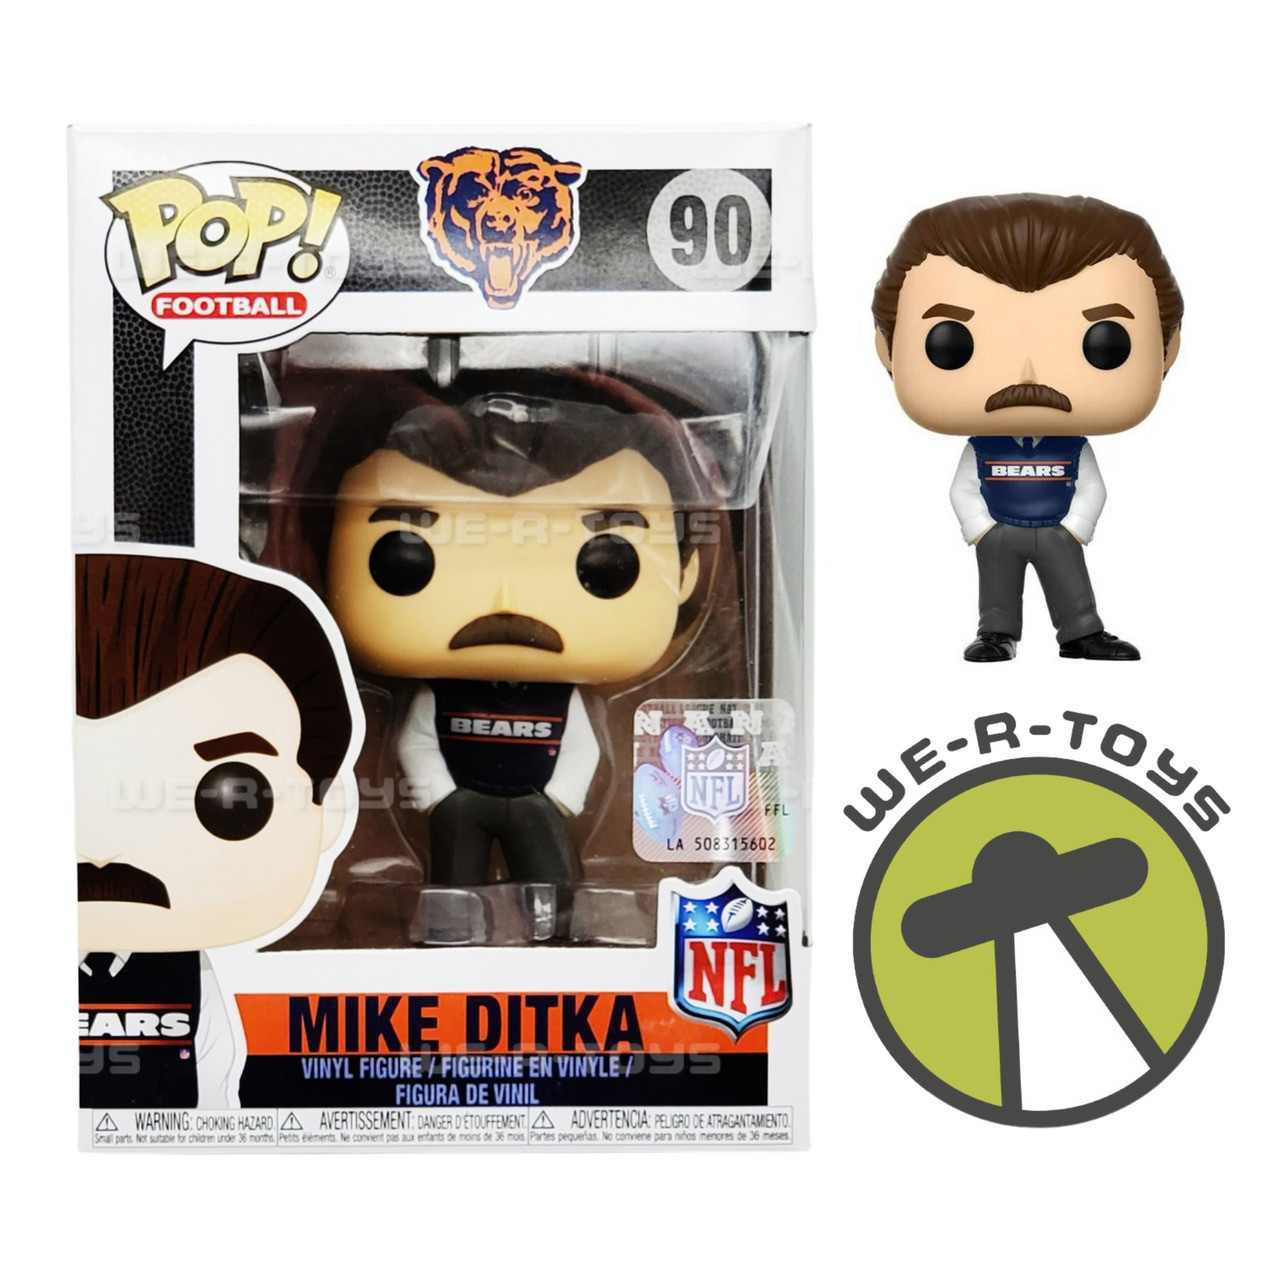 Football POP! Series 1 Figures From Funko